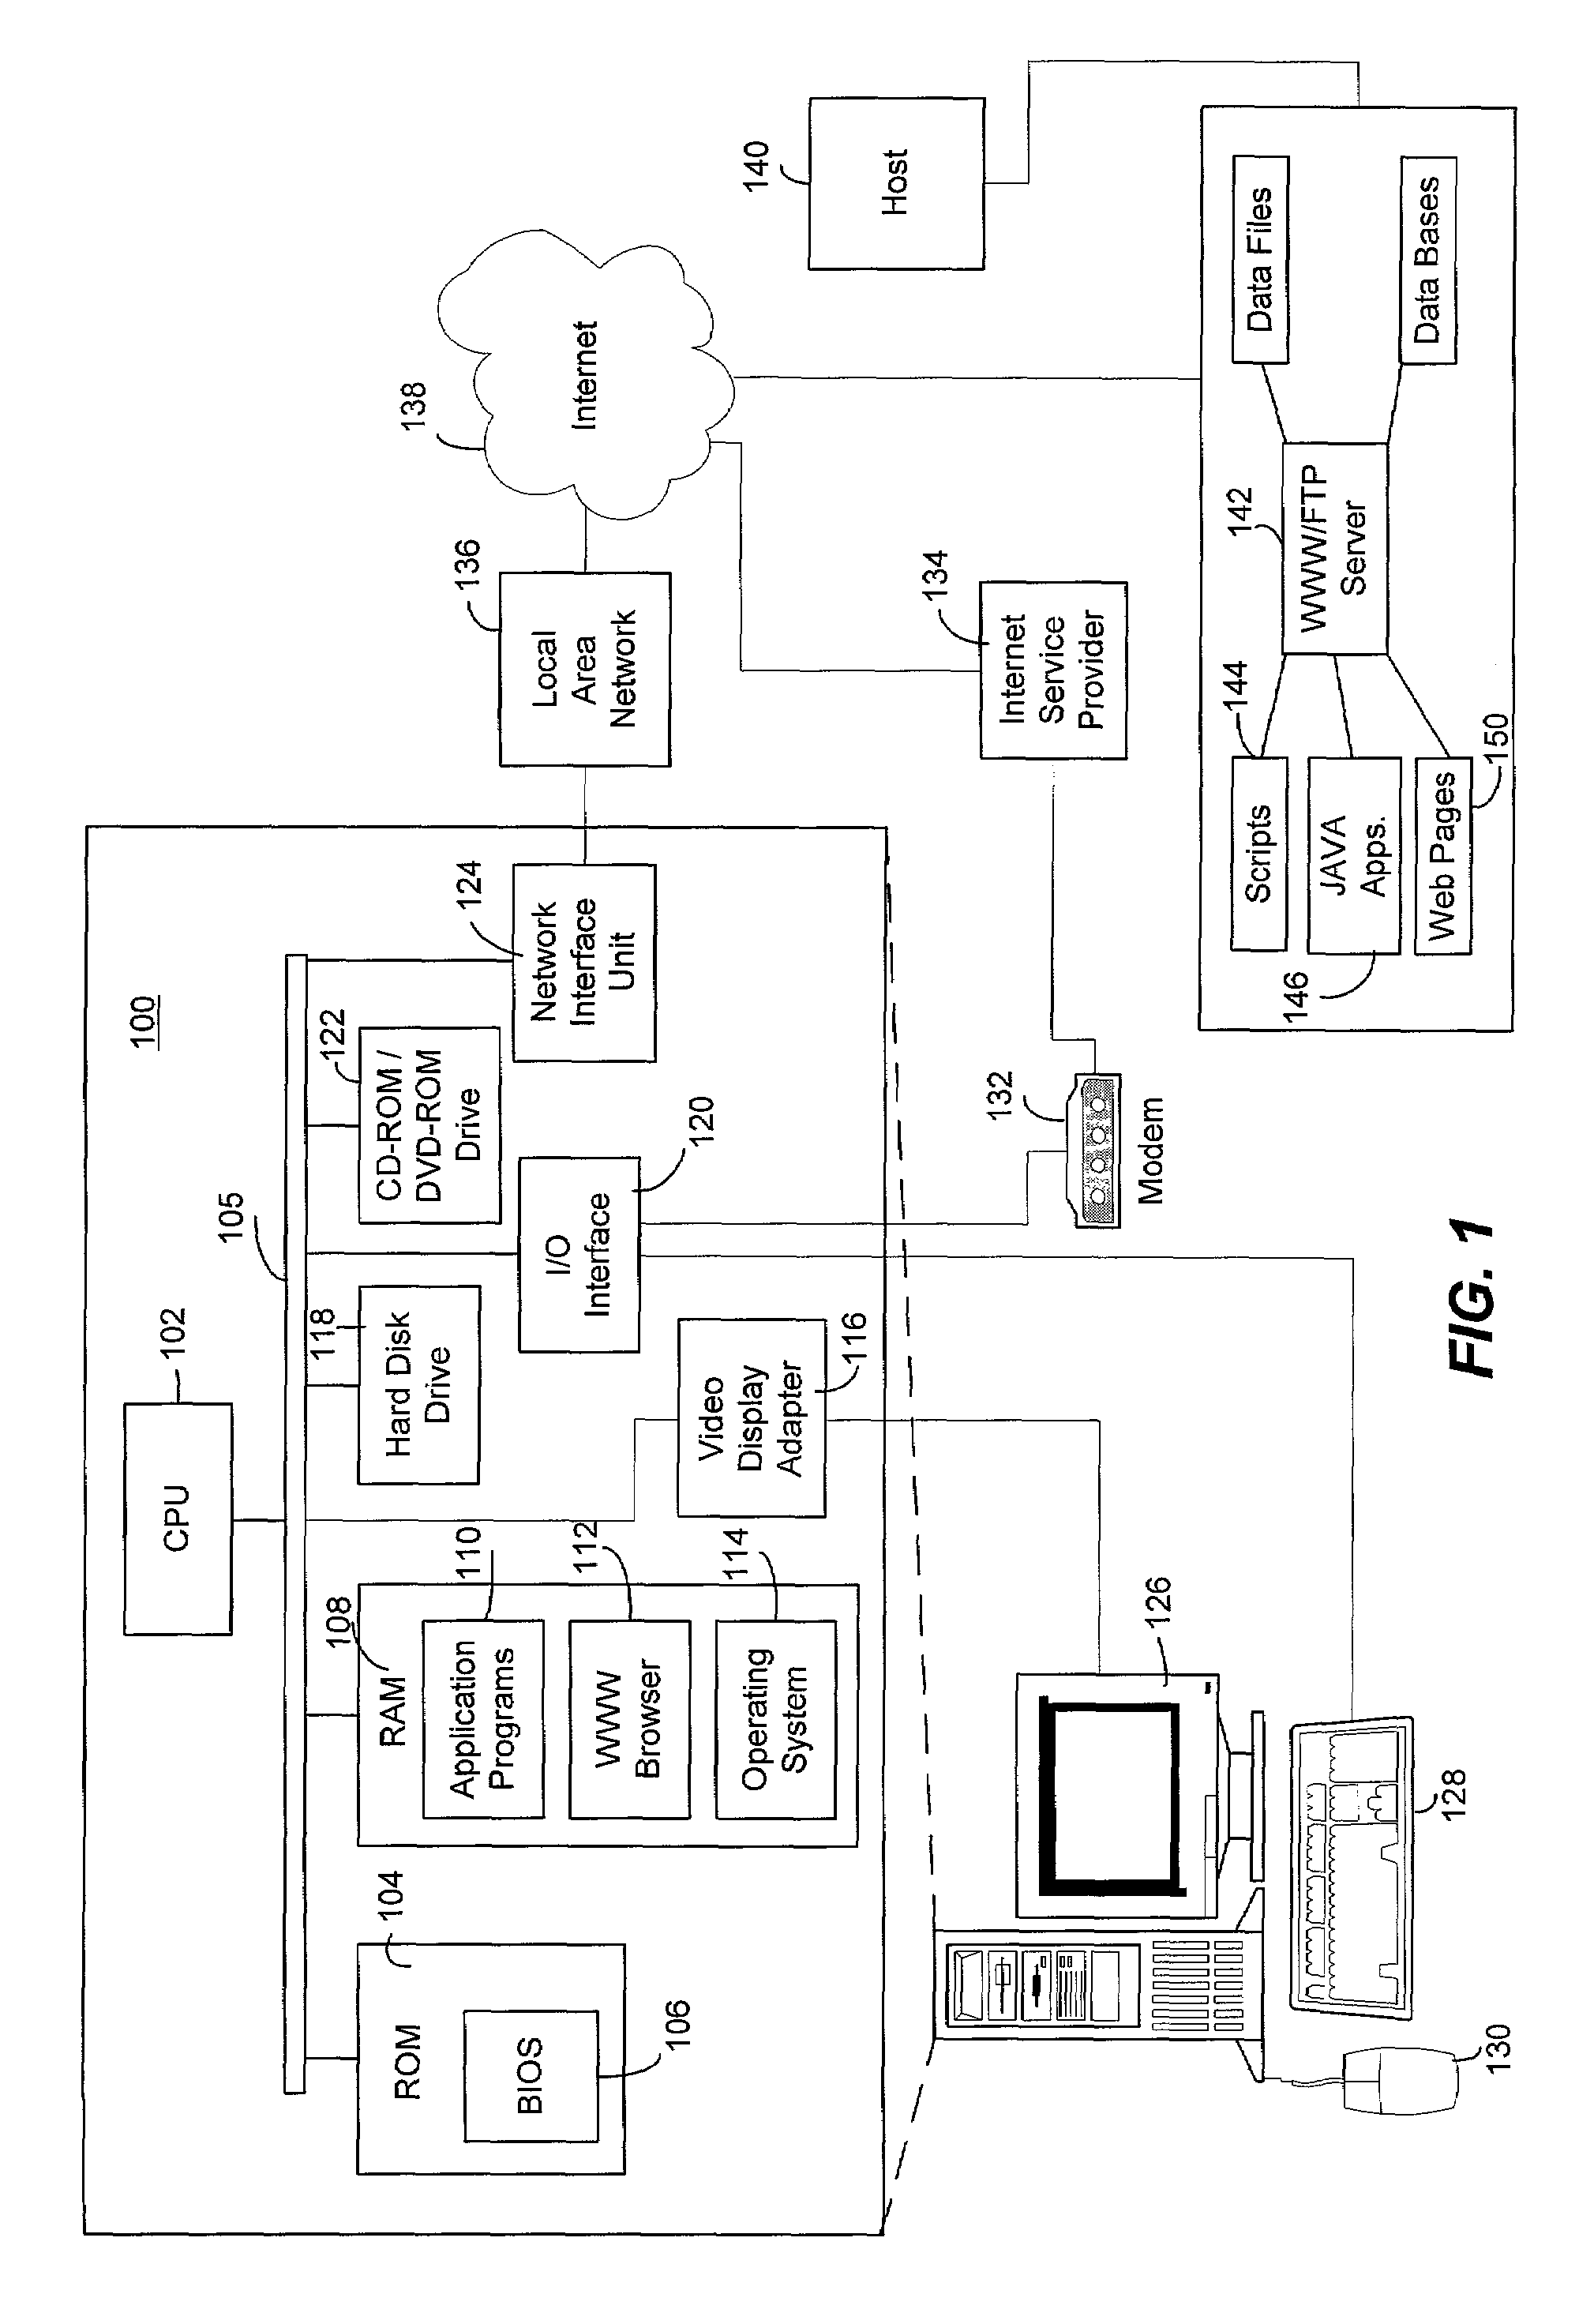 Integrated computer security management system and method